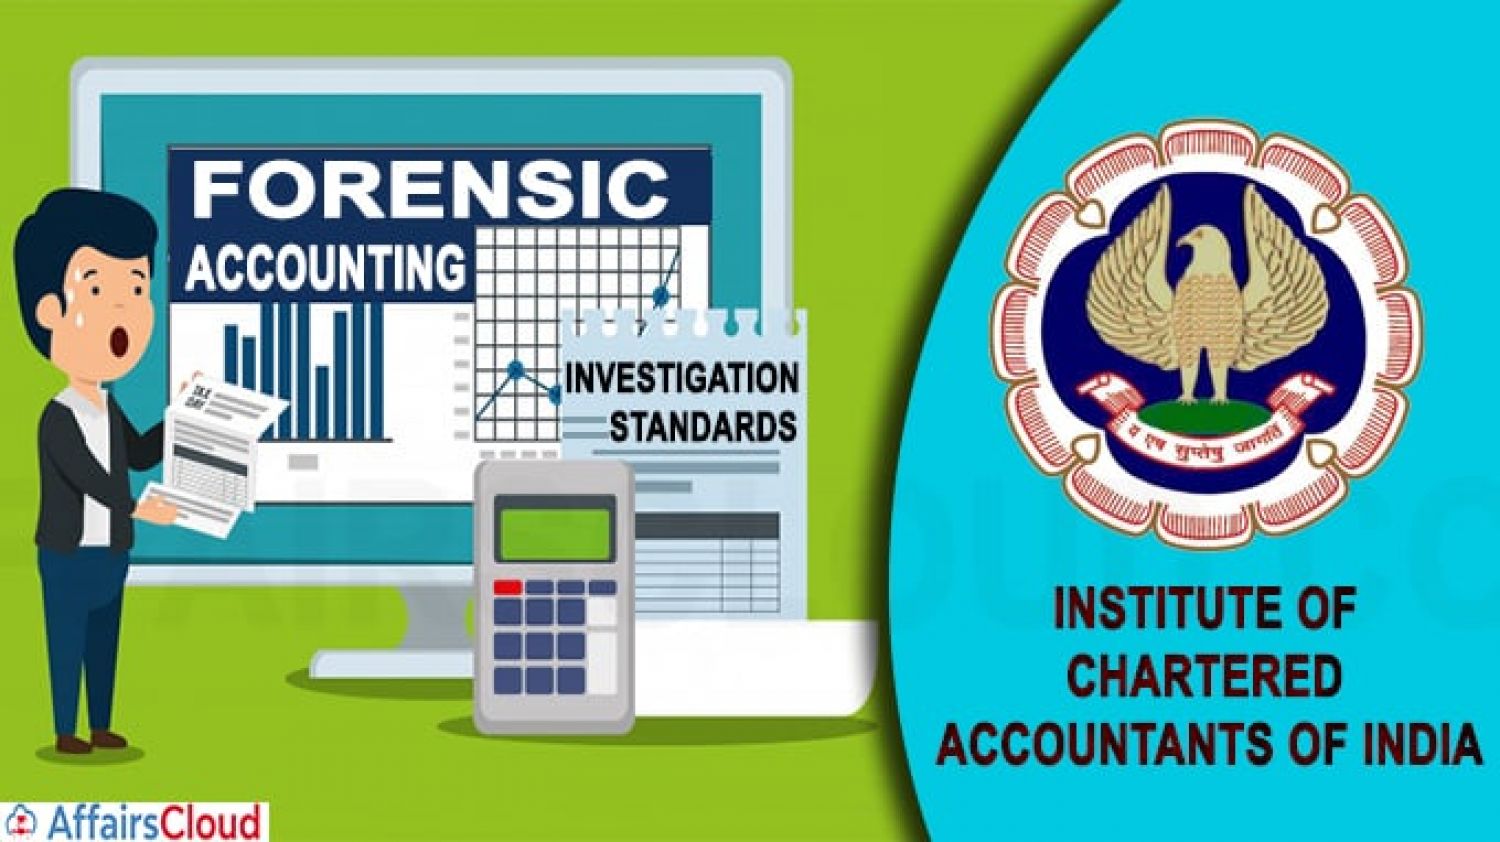 Indian Government and ICAI going to issue the FAIS (Forensic Accounting and Investigation Standards)